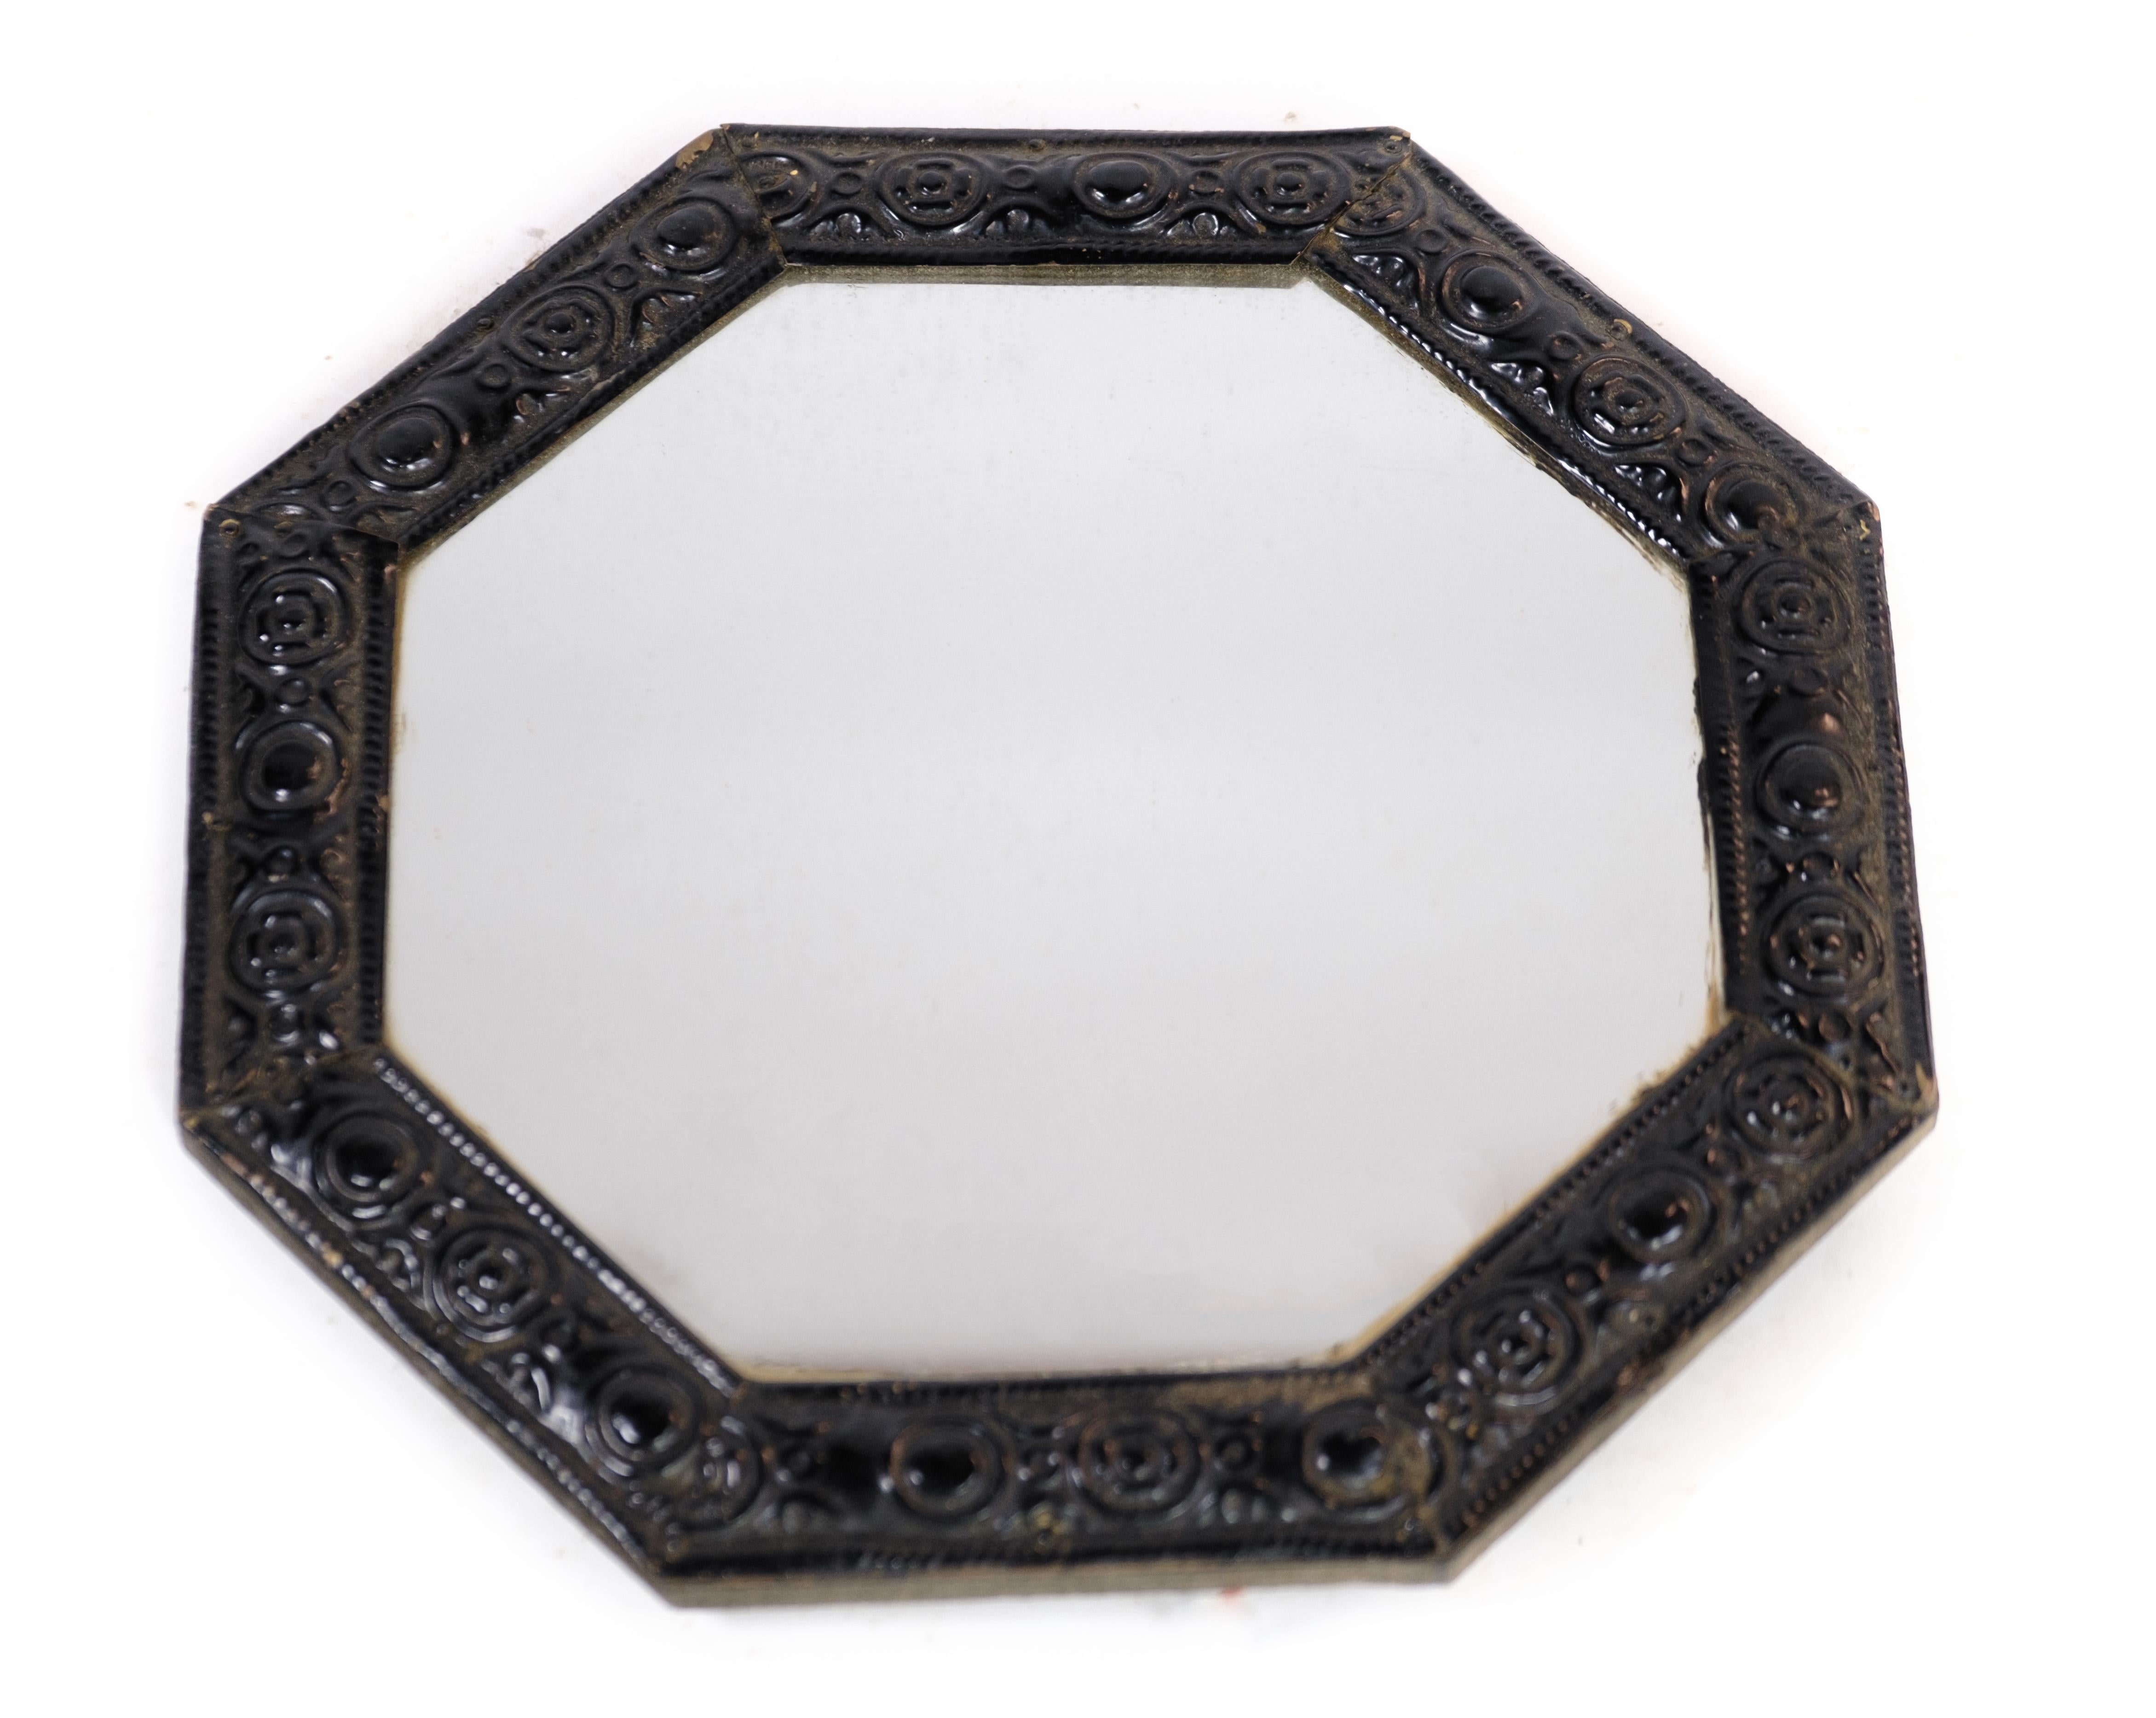 Antique mirror in dark wood from around the 1890s.
Dimensions in cm: H:30.5 W:30.5

This product will be inspected thoroughly at our professional workshop by our educated employees, who assure the product quality.